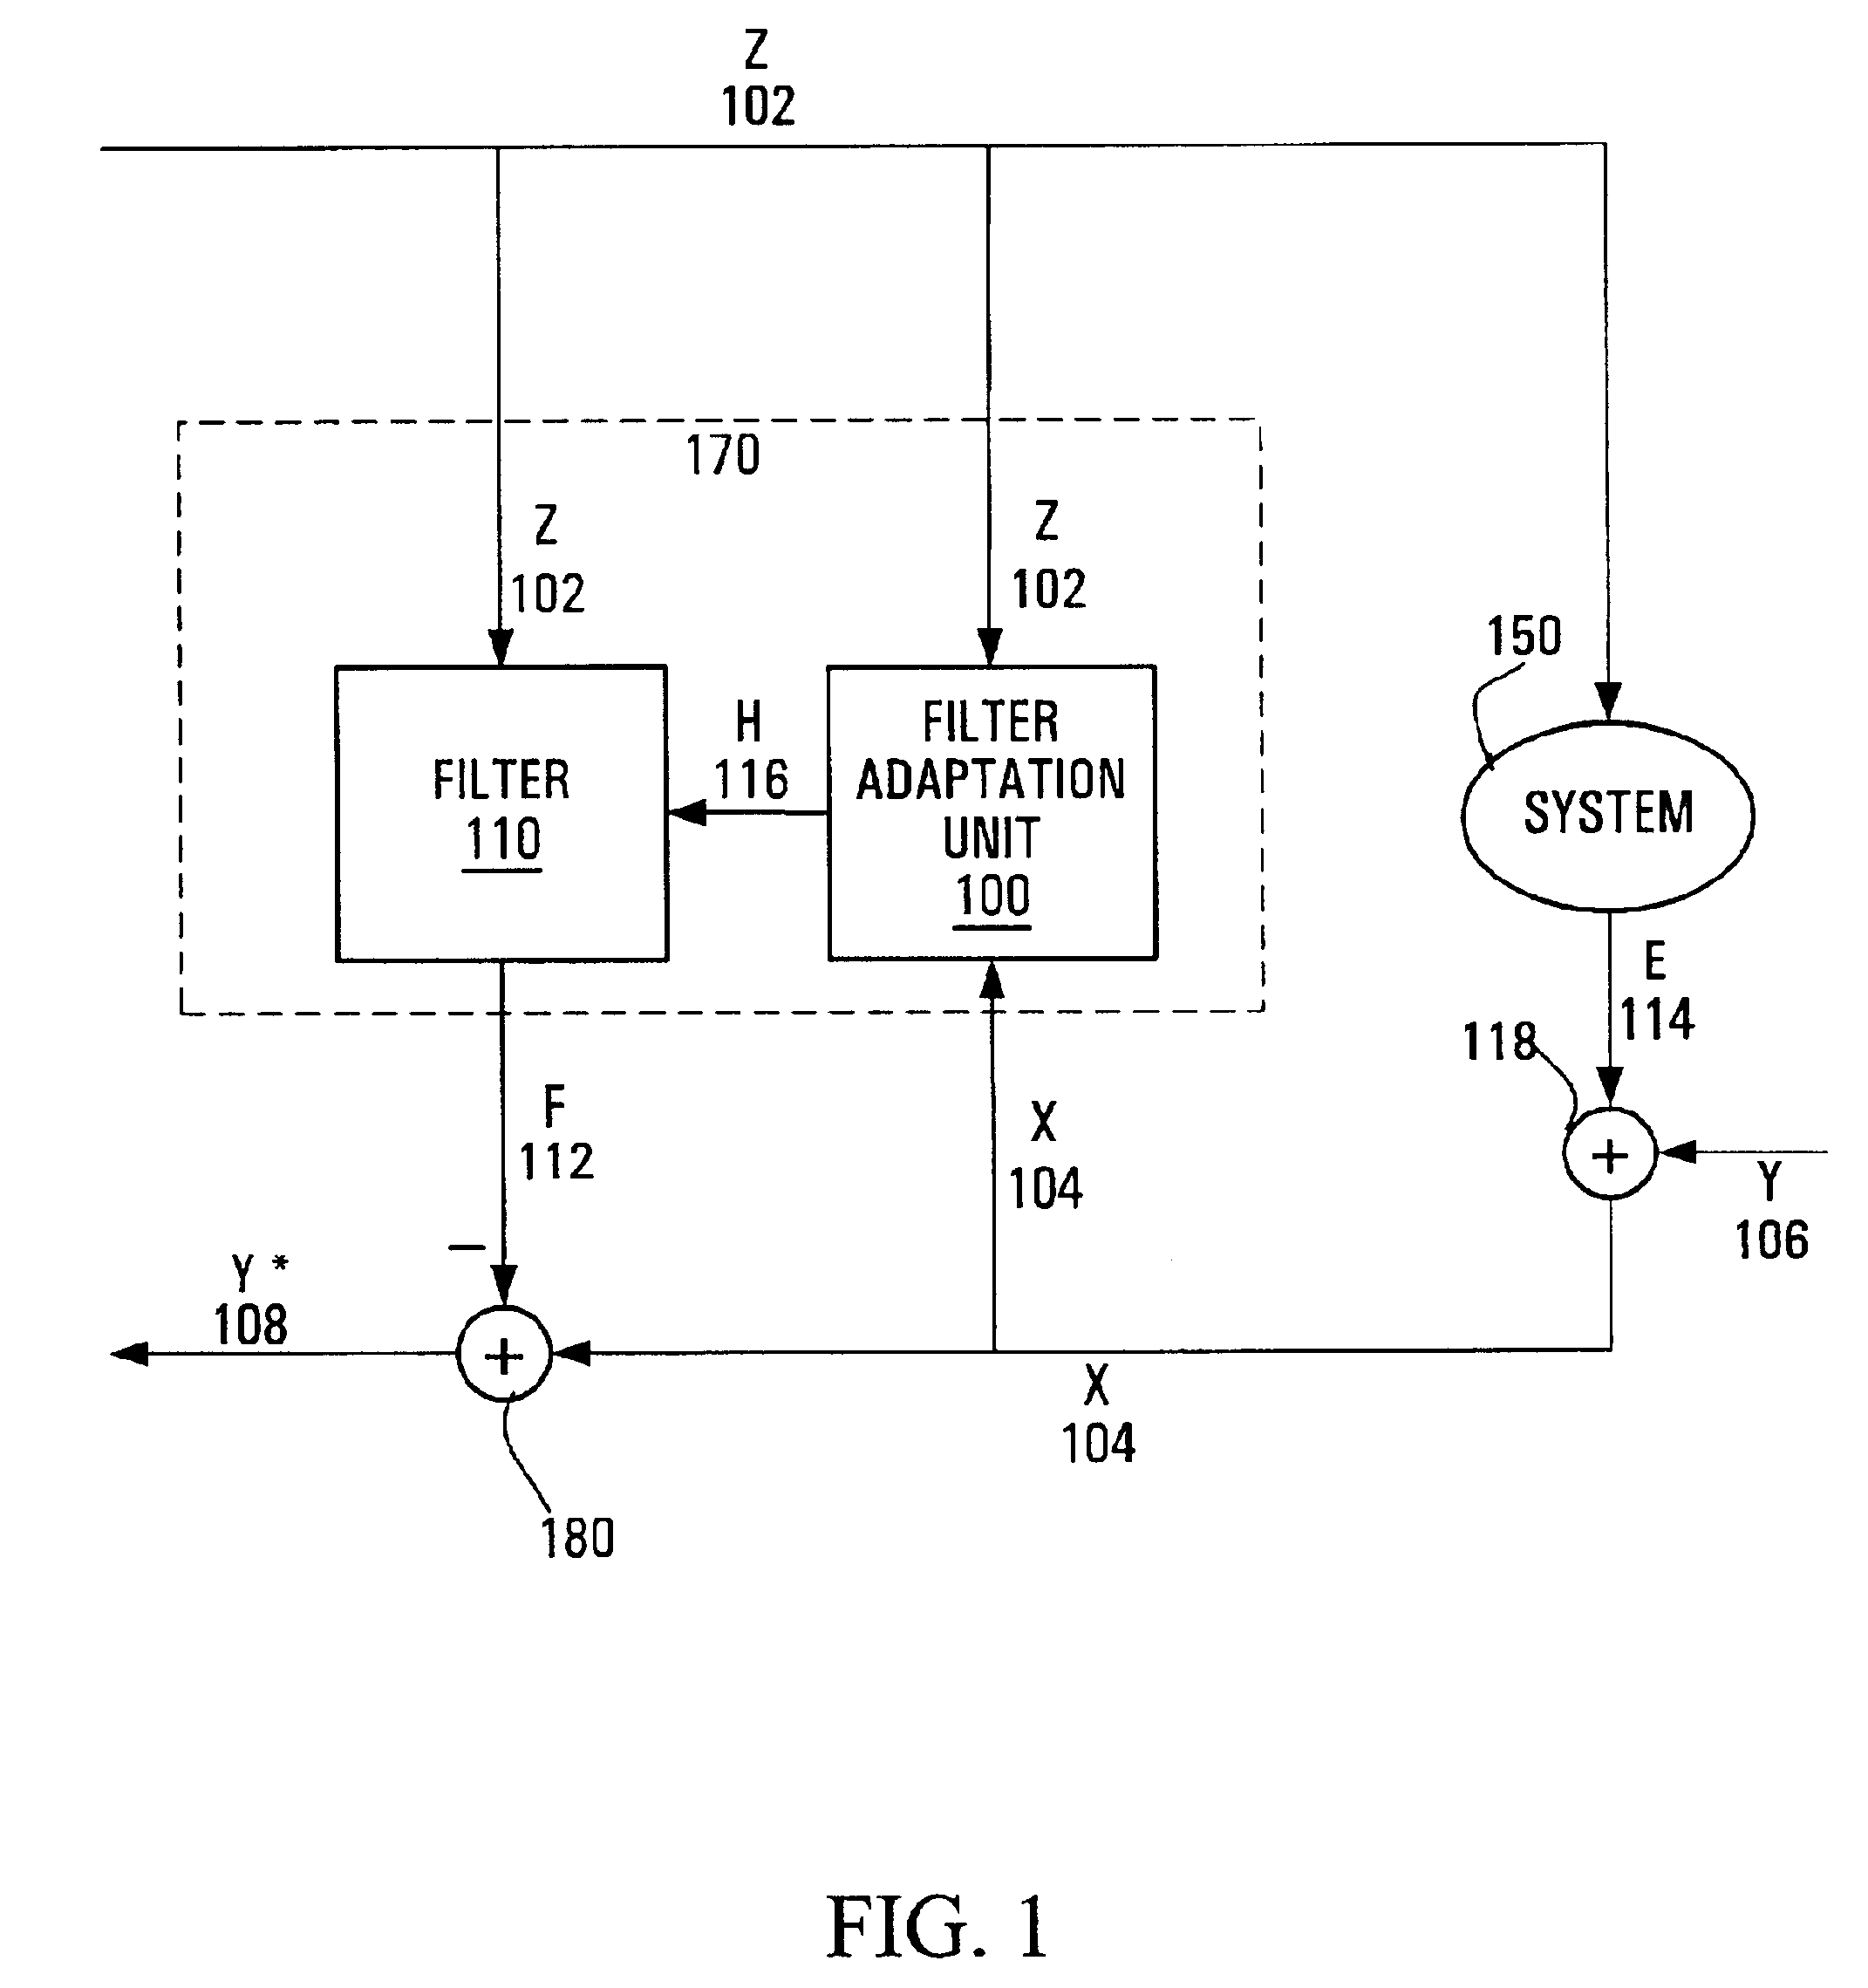 Method and apparatus for providing an error characterization estimate of an impulse response derived using least squares